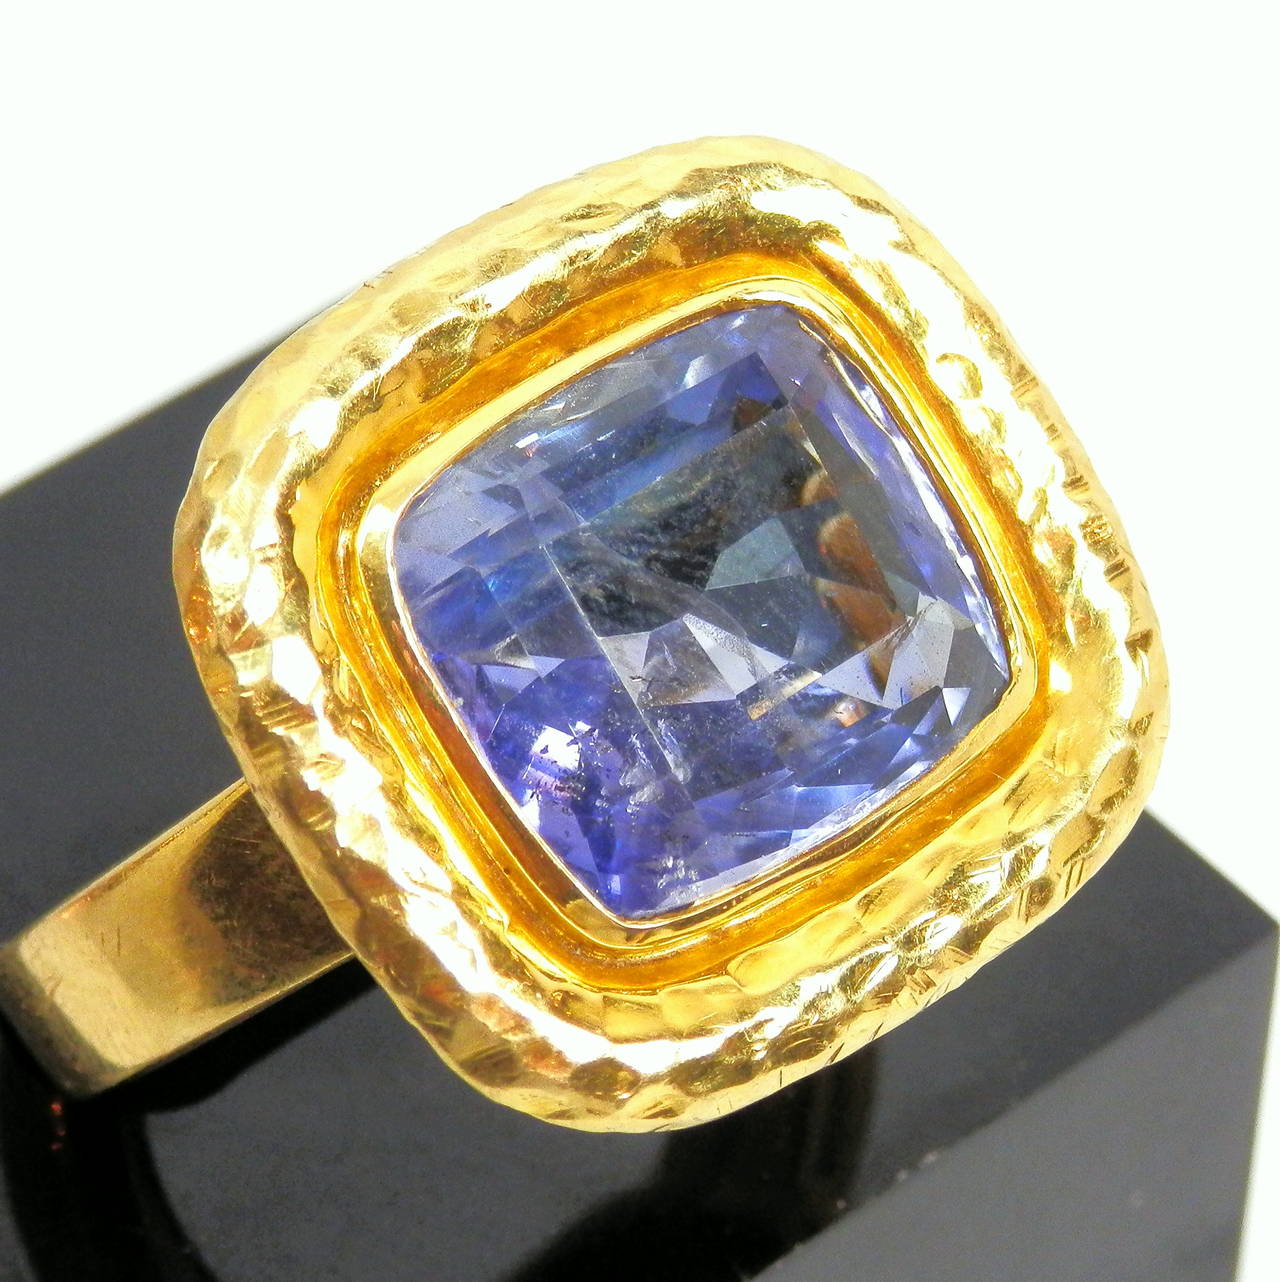 18K hammered finished rectangular cushion cut sapphire weighing 9.62 cts., Ceylon, no heat, clean, VS+ clarity ring which has a butterfly that is stamped both 18K and 750.  The stone measures 13.8 mm by 12.25 mm by 6.6 mm deep.  The sapphire is an